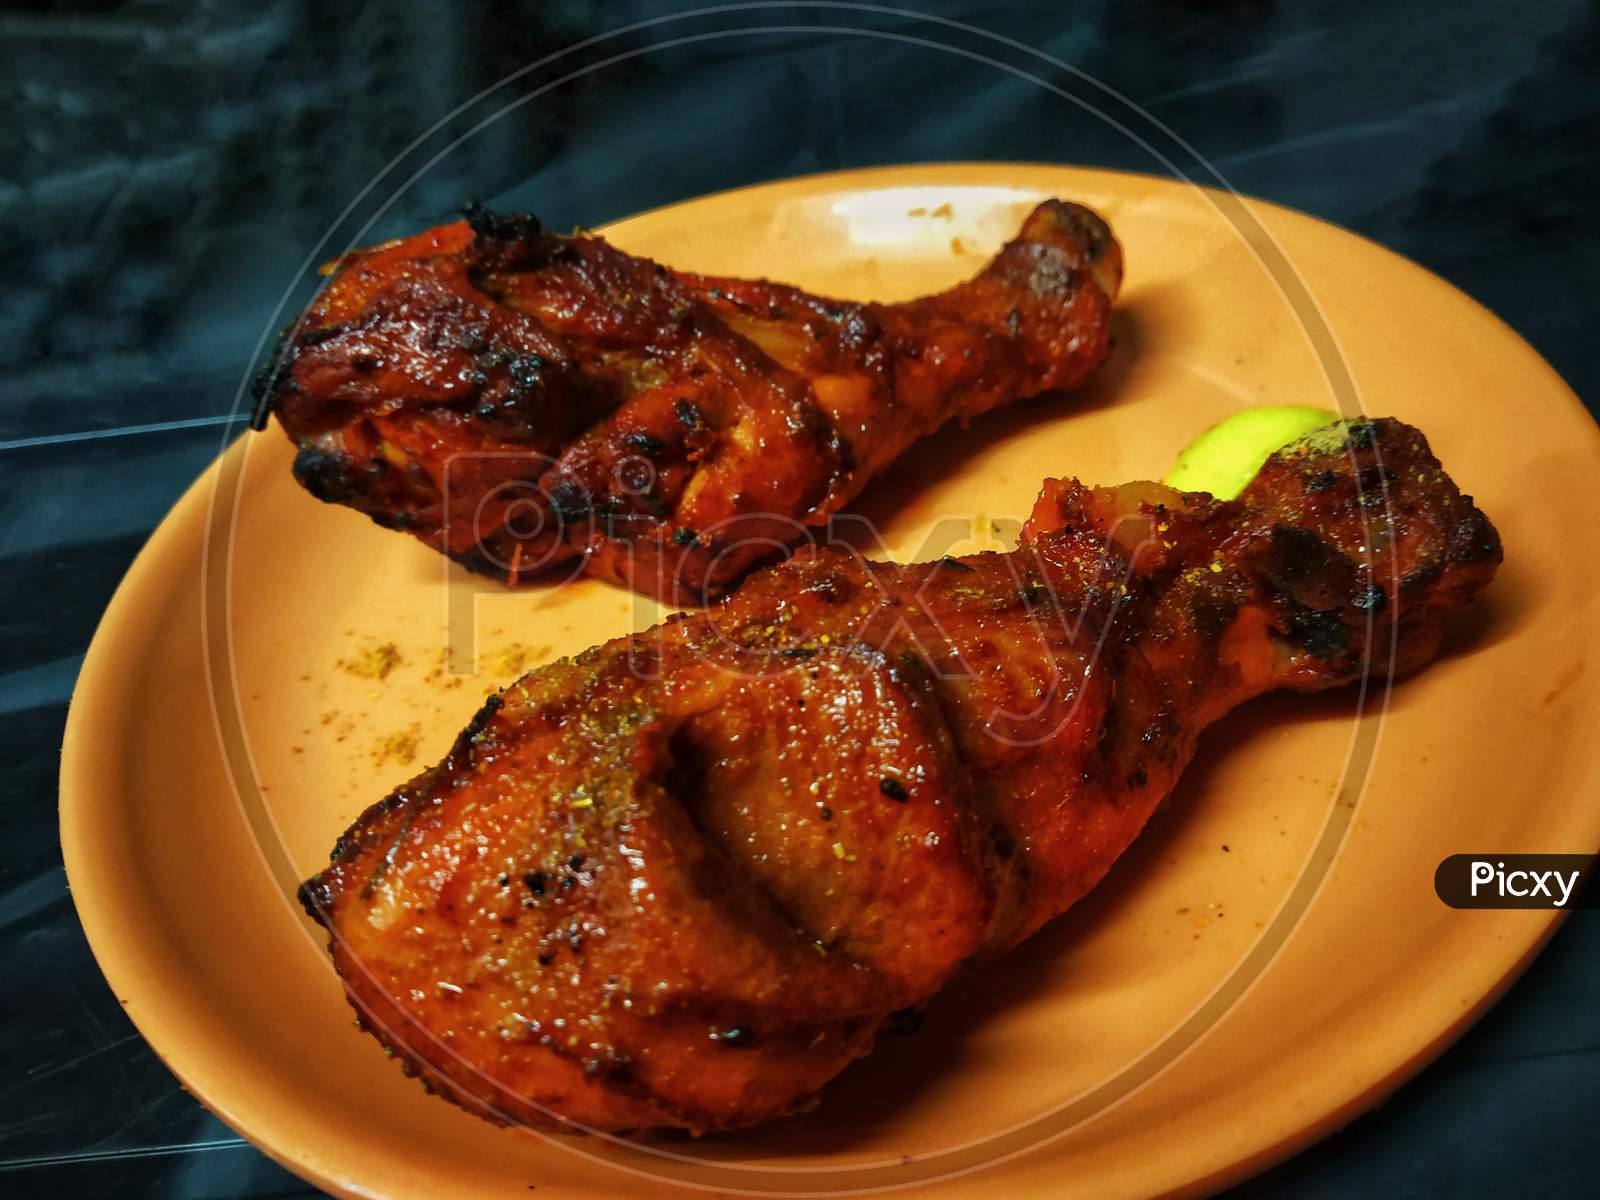 2 Tandoori Chicken Leg Pieces Placed In An Orange Plate With A Piece Of Lemon On A Black Table.